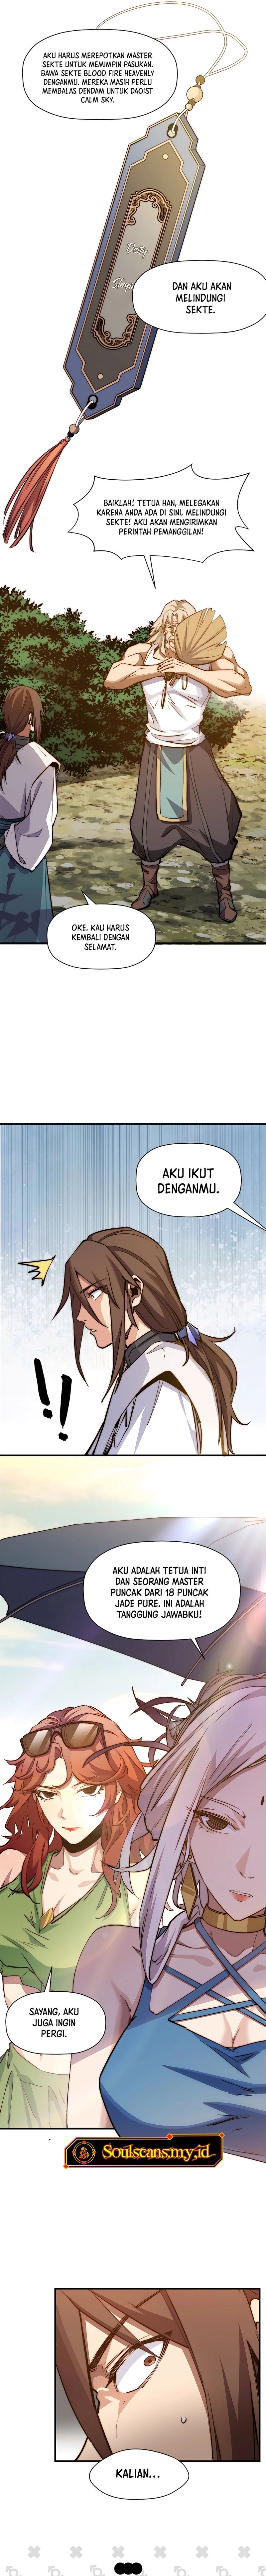 Dilarang COPAS - situs resmi www.mangacanblog.com - Komik top tier providence secretly cultivate for a thousand years 138 - chapter 138 139 Indonesia top tier providence secretly cultivate for a thousand years 138 - chapter 138 Terbaru 13|Baca Manga Komik Indonesia|Mangacan